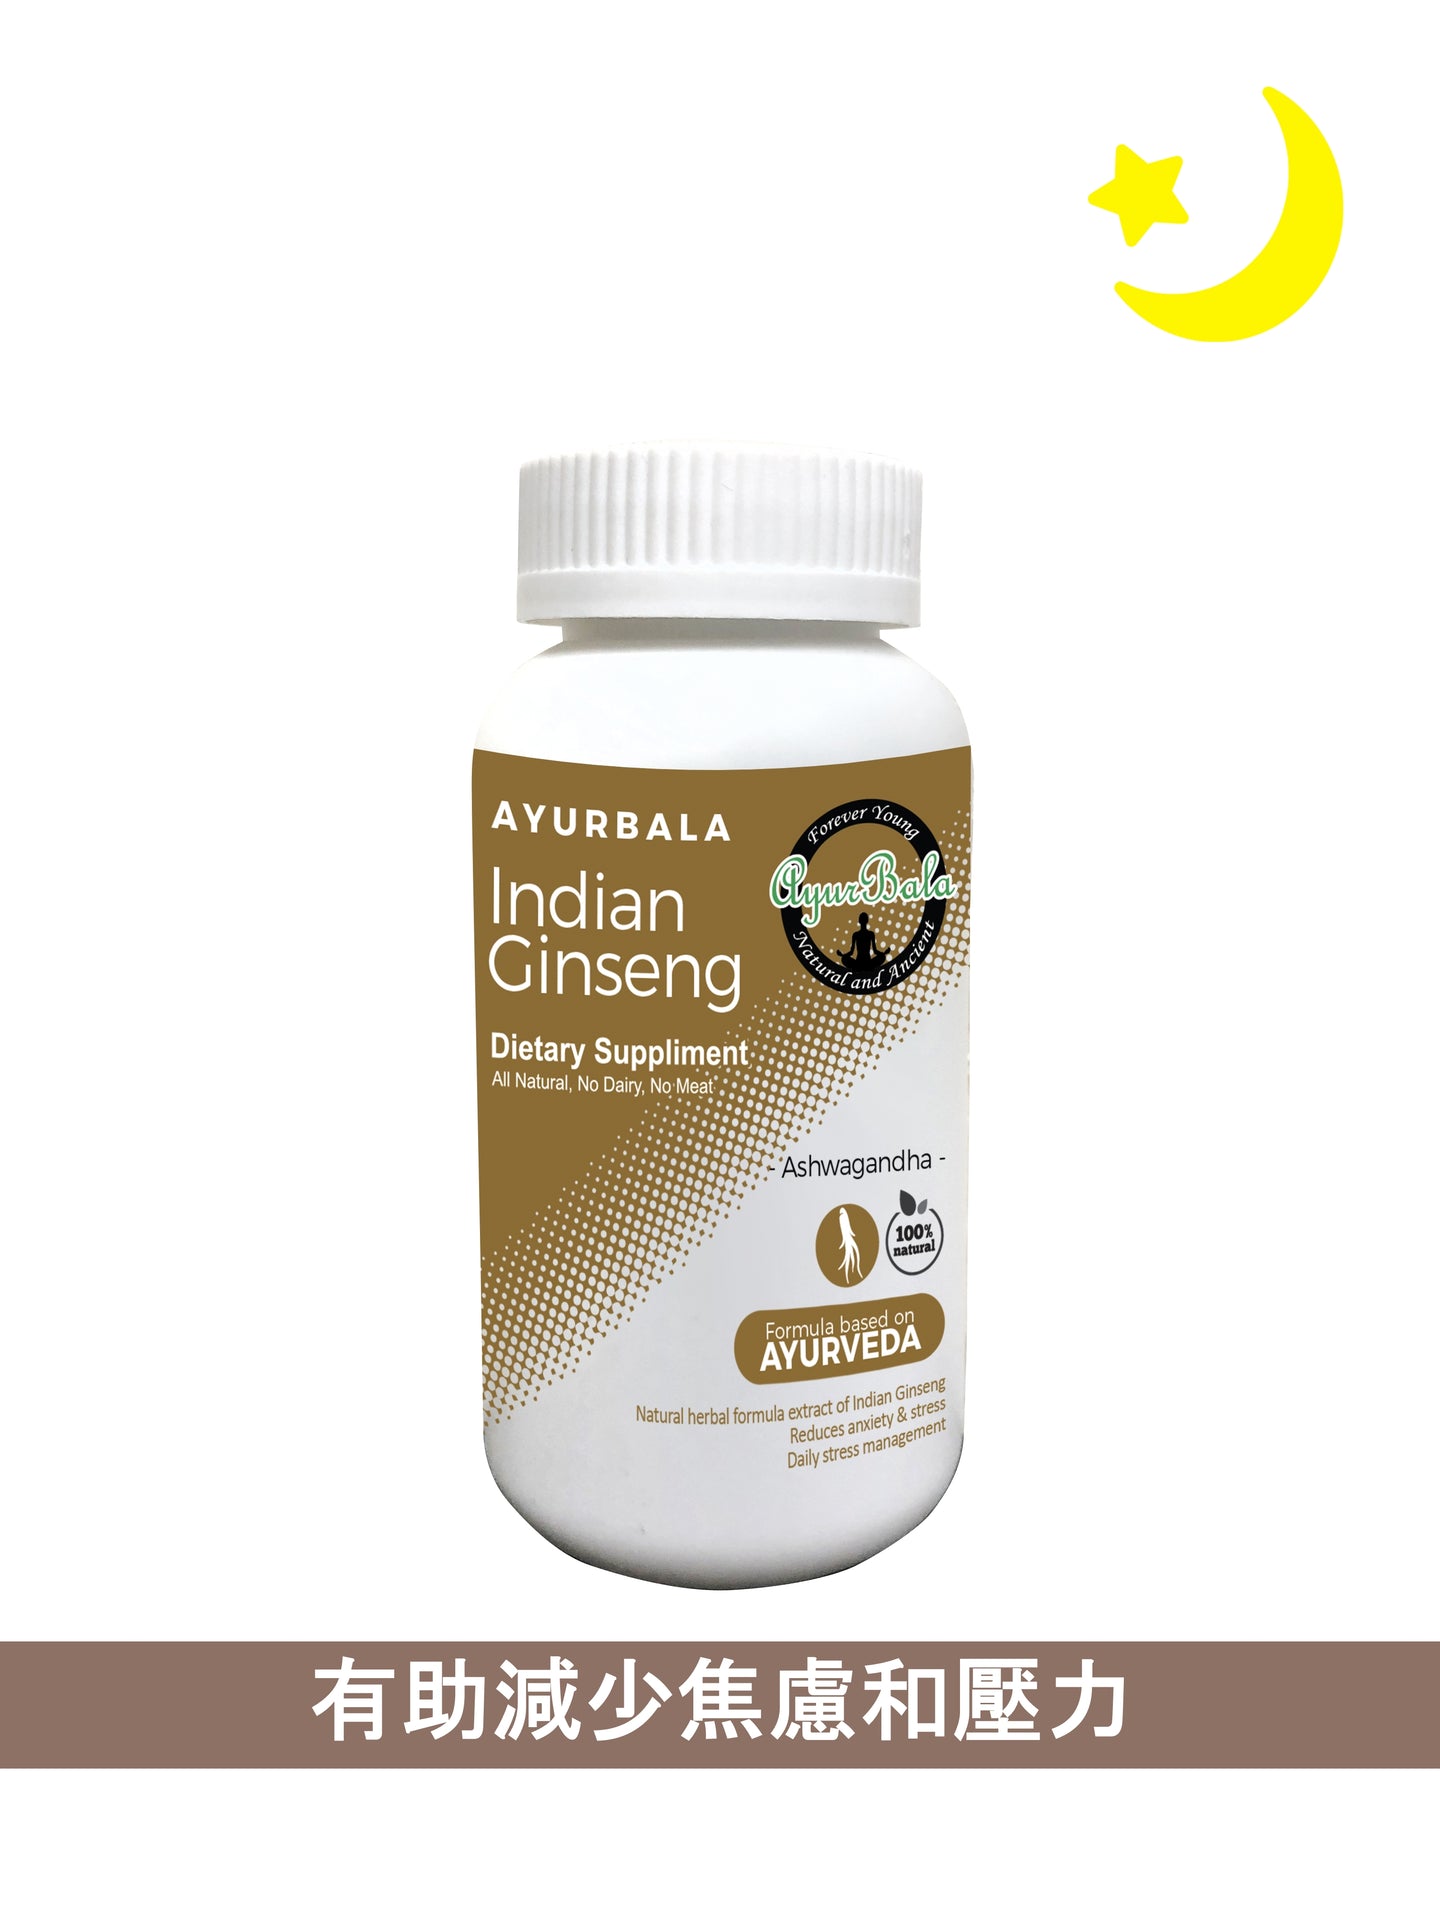 Indian Ginseng (Sleep Easy & Anti- anxiety) (2 items 15% off, 3 item 25% off) Free Delivery in HK